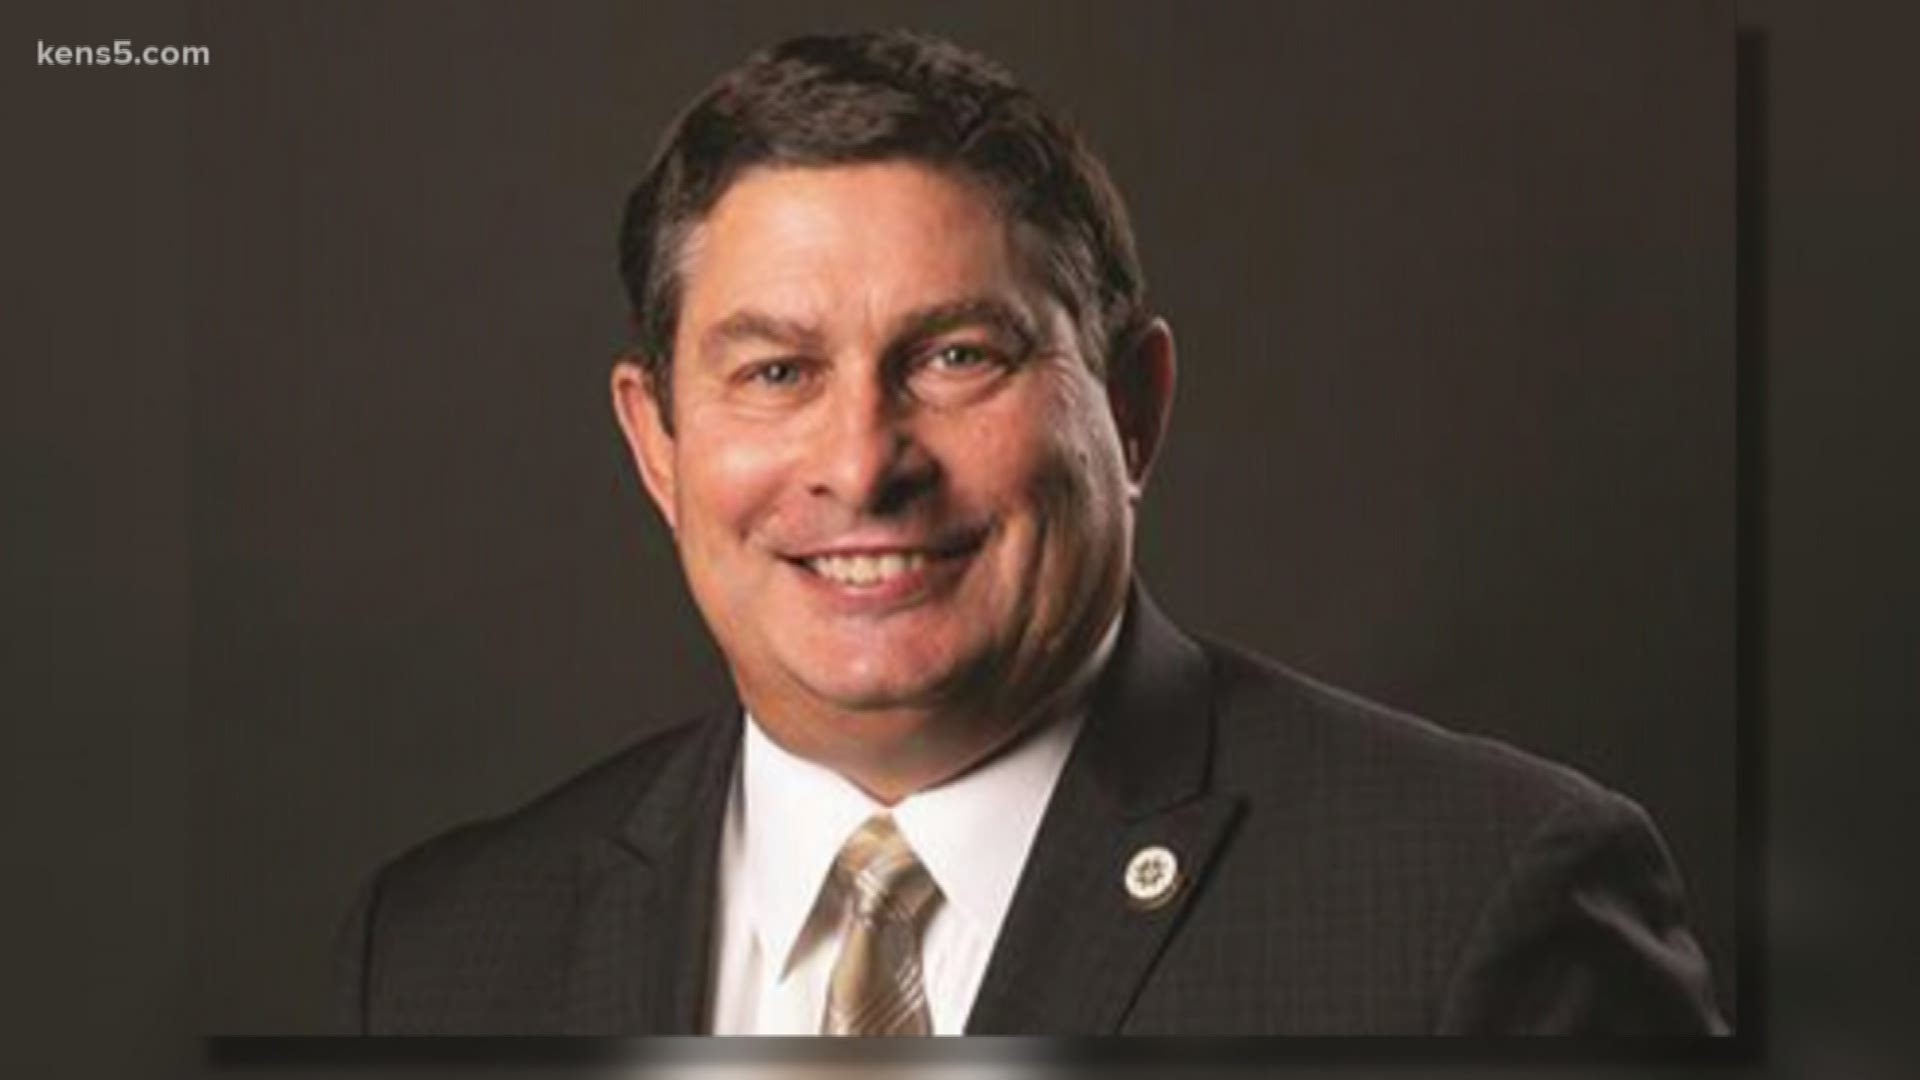 During a board meeting Monday night, North East ISD Superintendent Dr. Brian G. Gottardy announced his plans to retire, effective June 30, 2019.